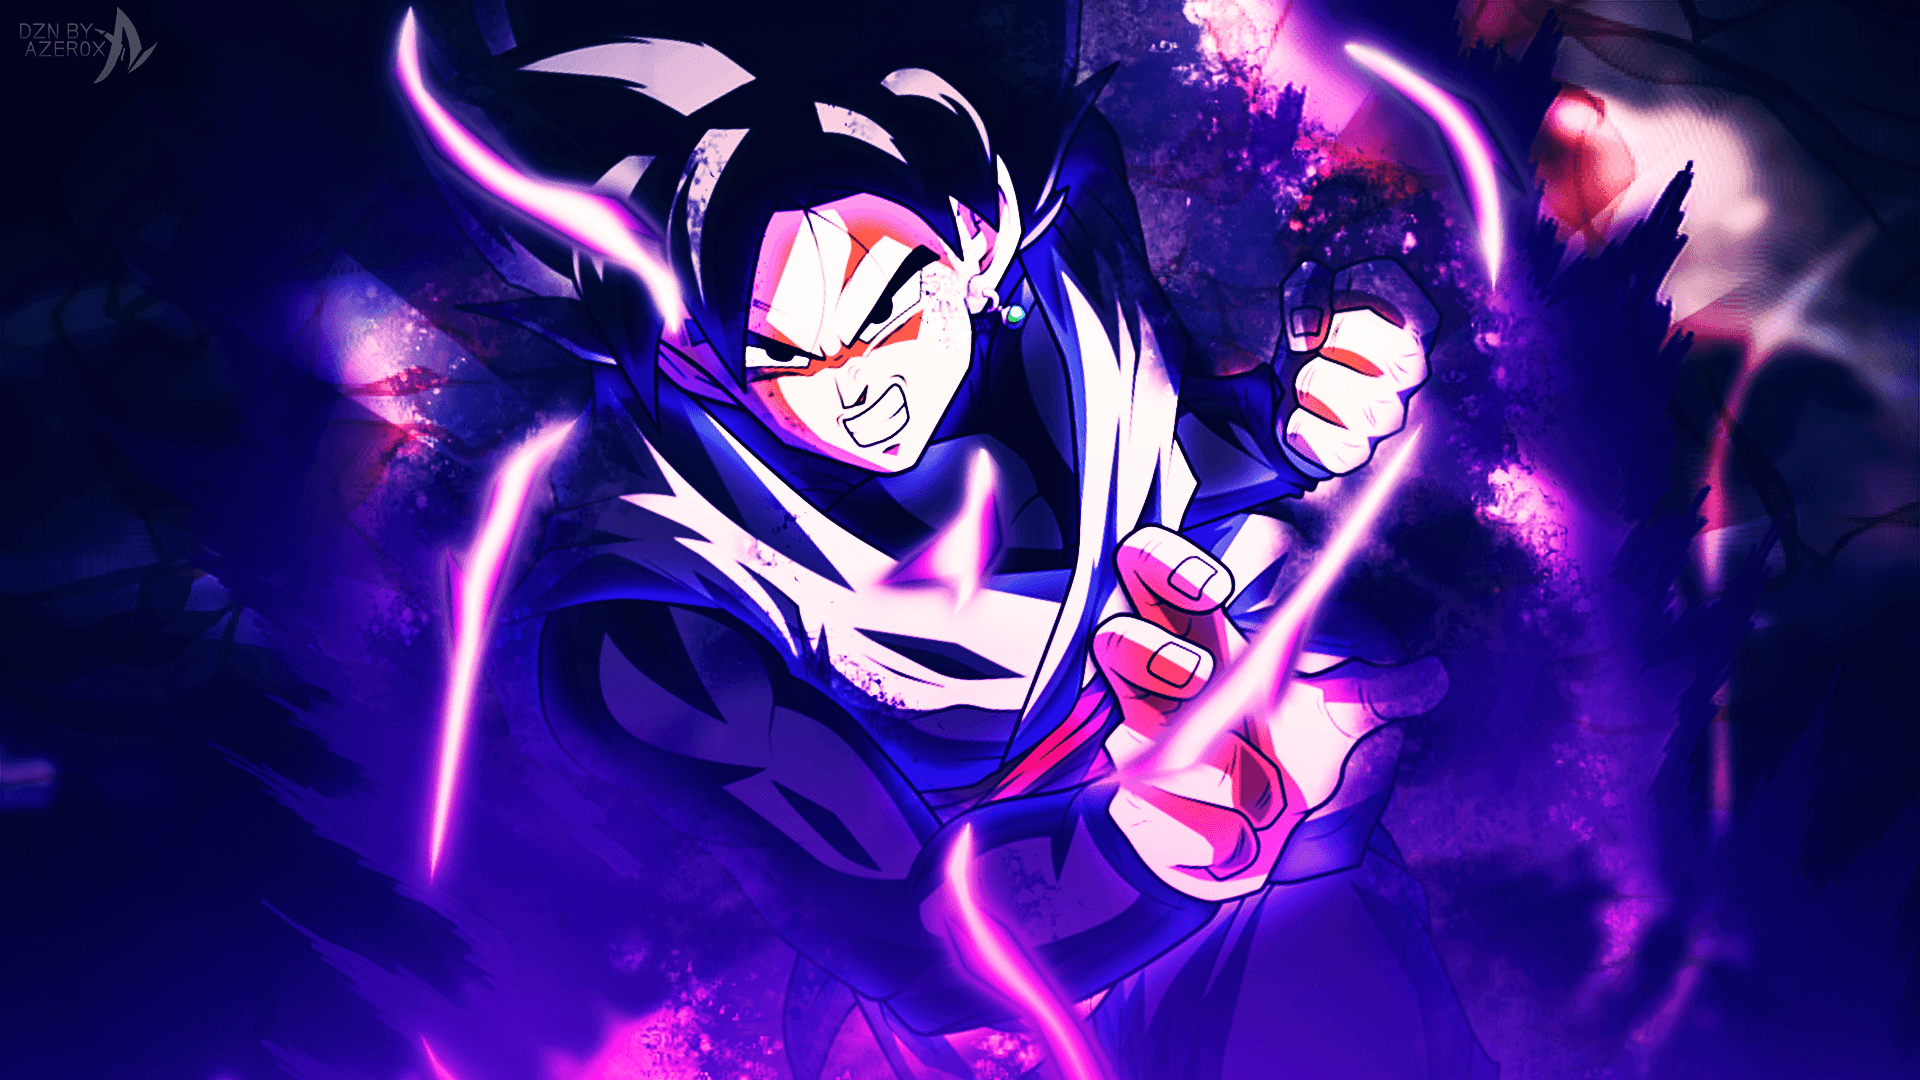 Black Goku Wallpaper 4k For iPhone Android And Desktop The